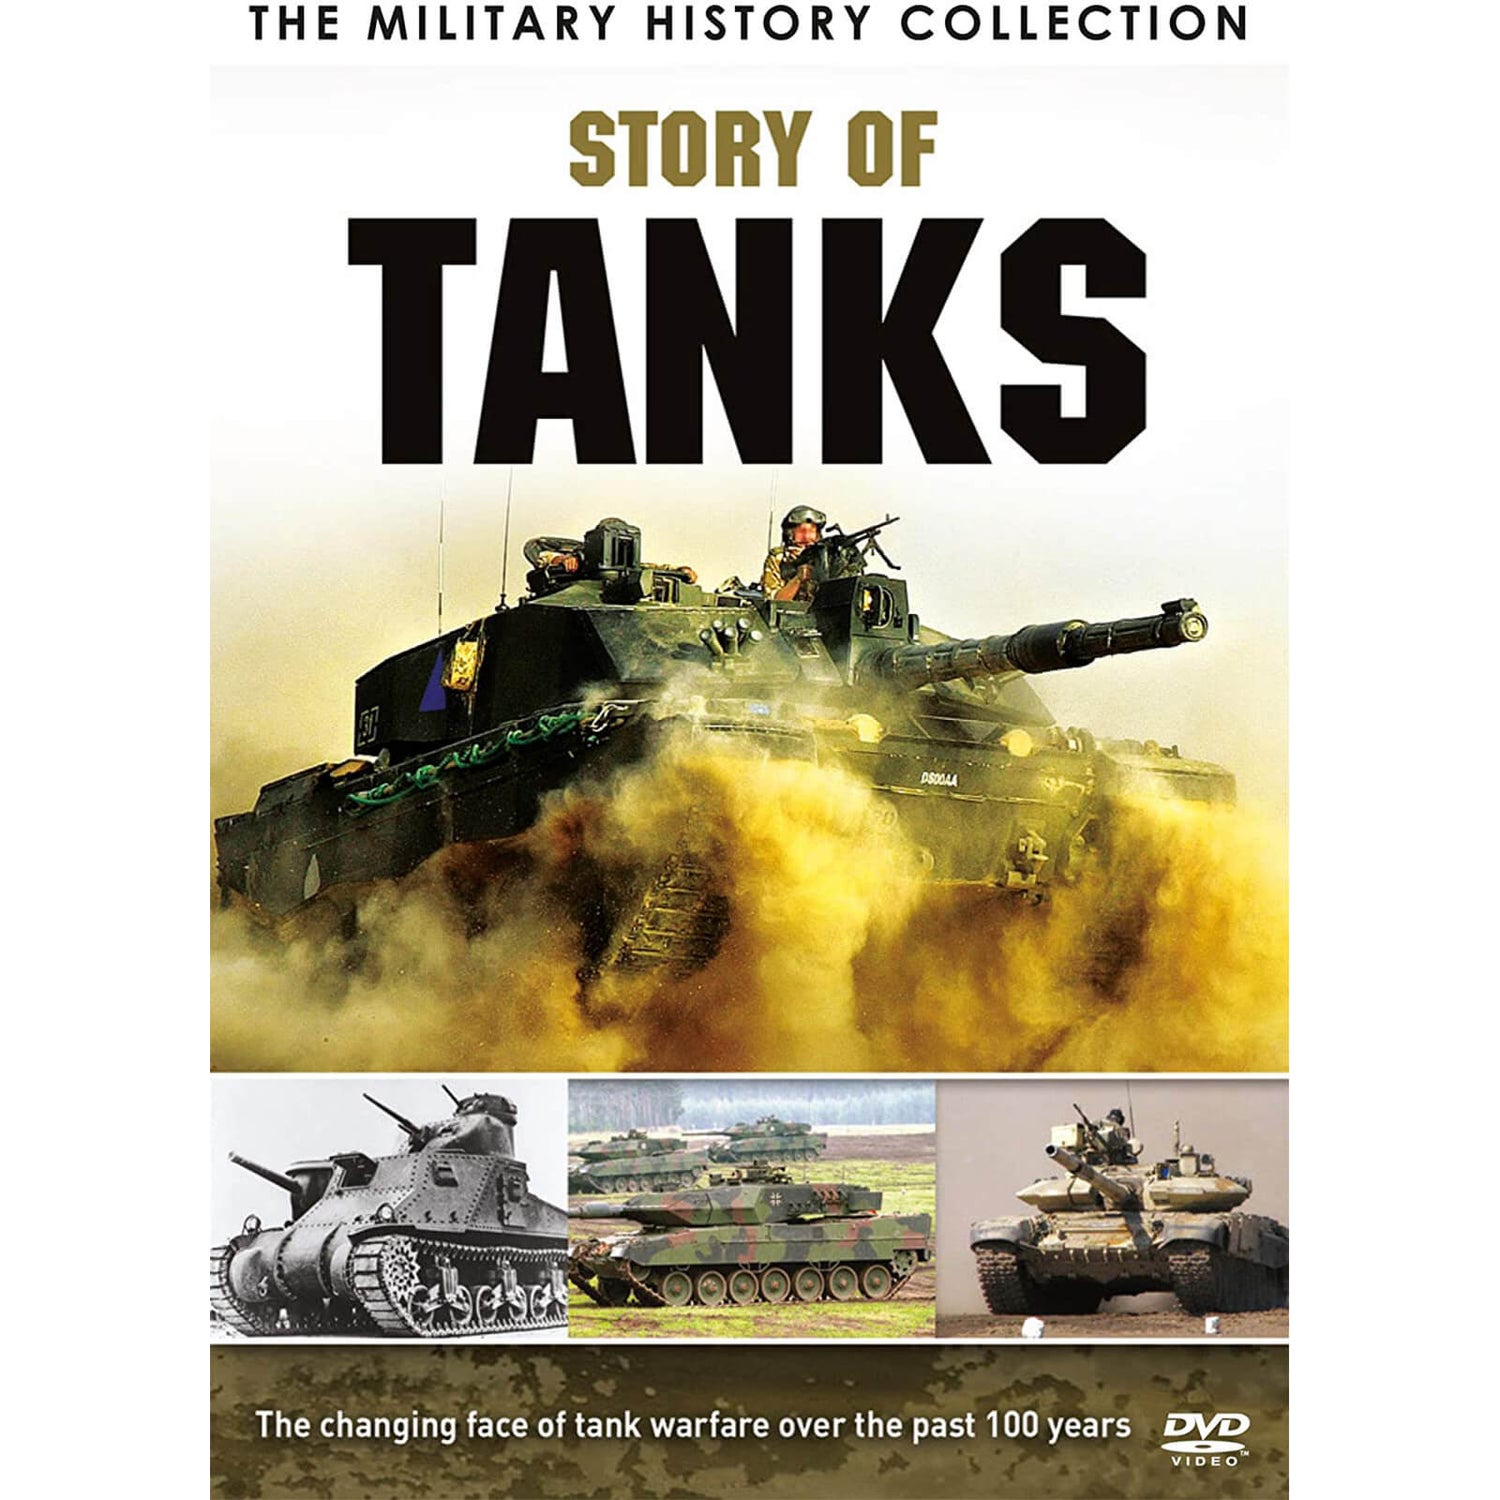 The Miltary History Collection: Story of Tanks